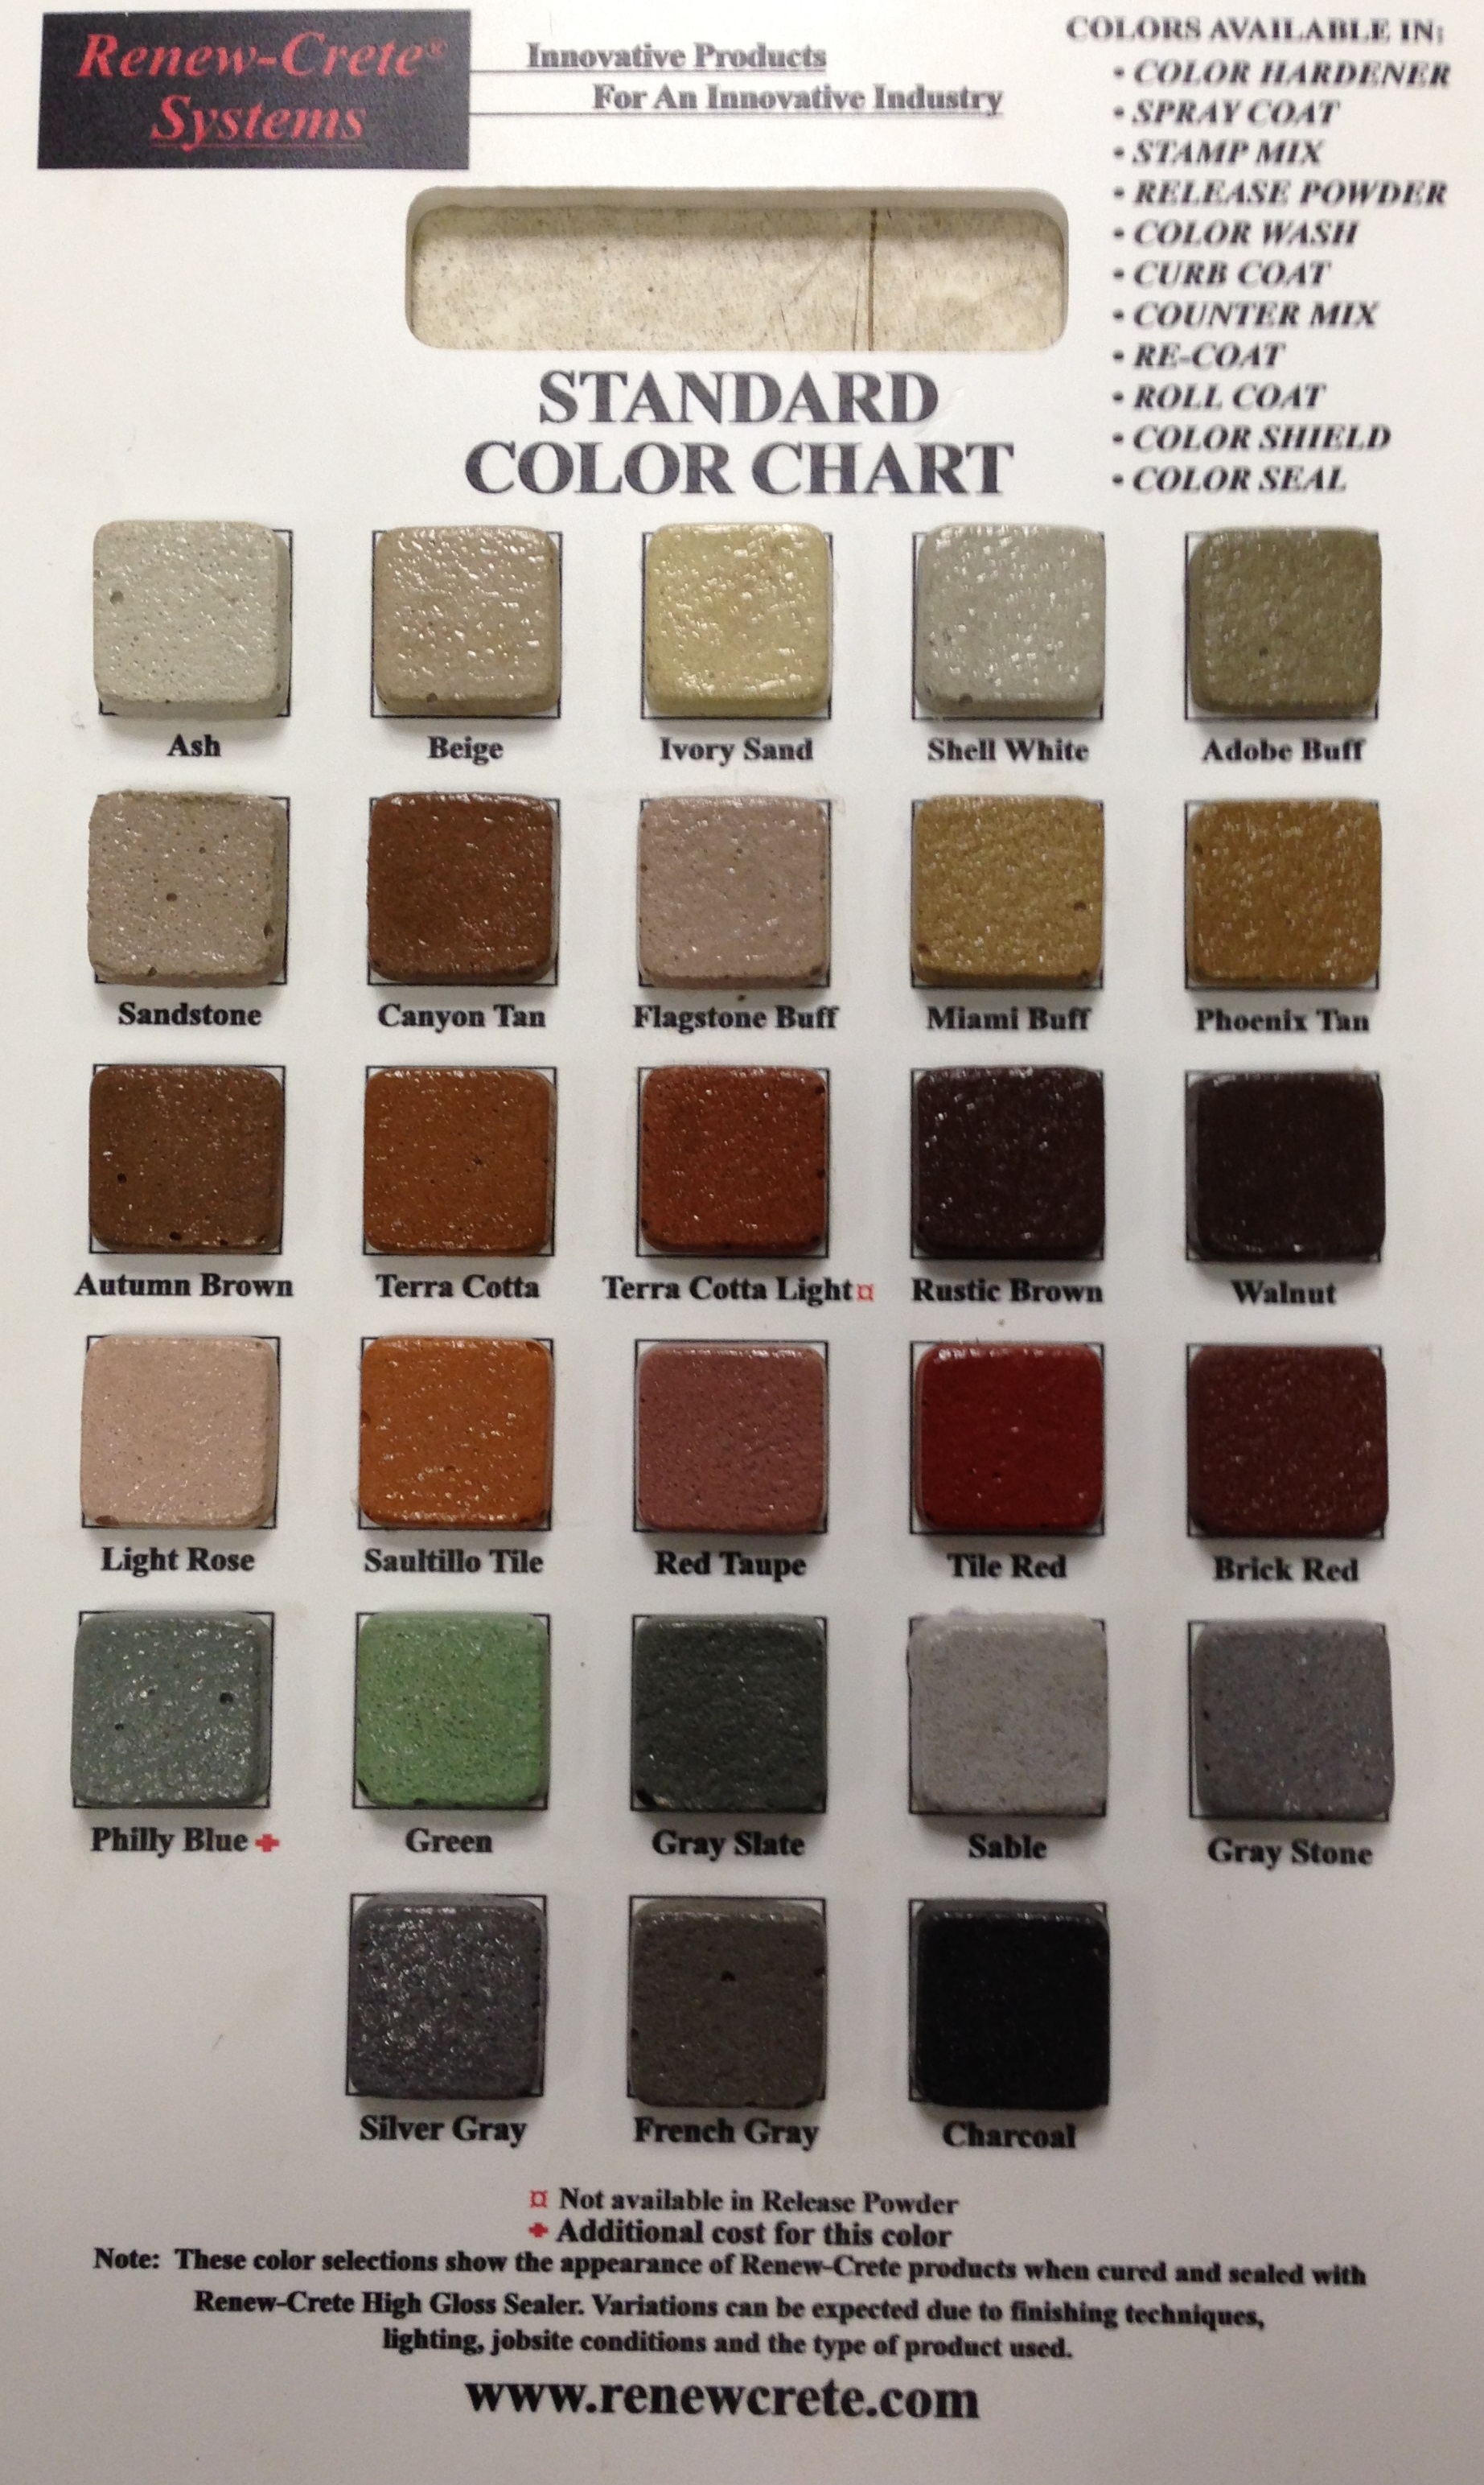 Renew-Crete System Standard Color Chart Innovative Products